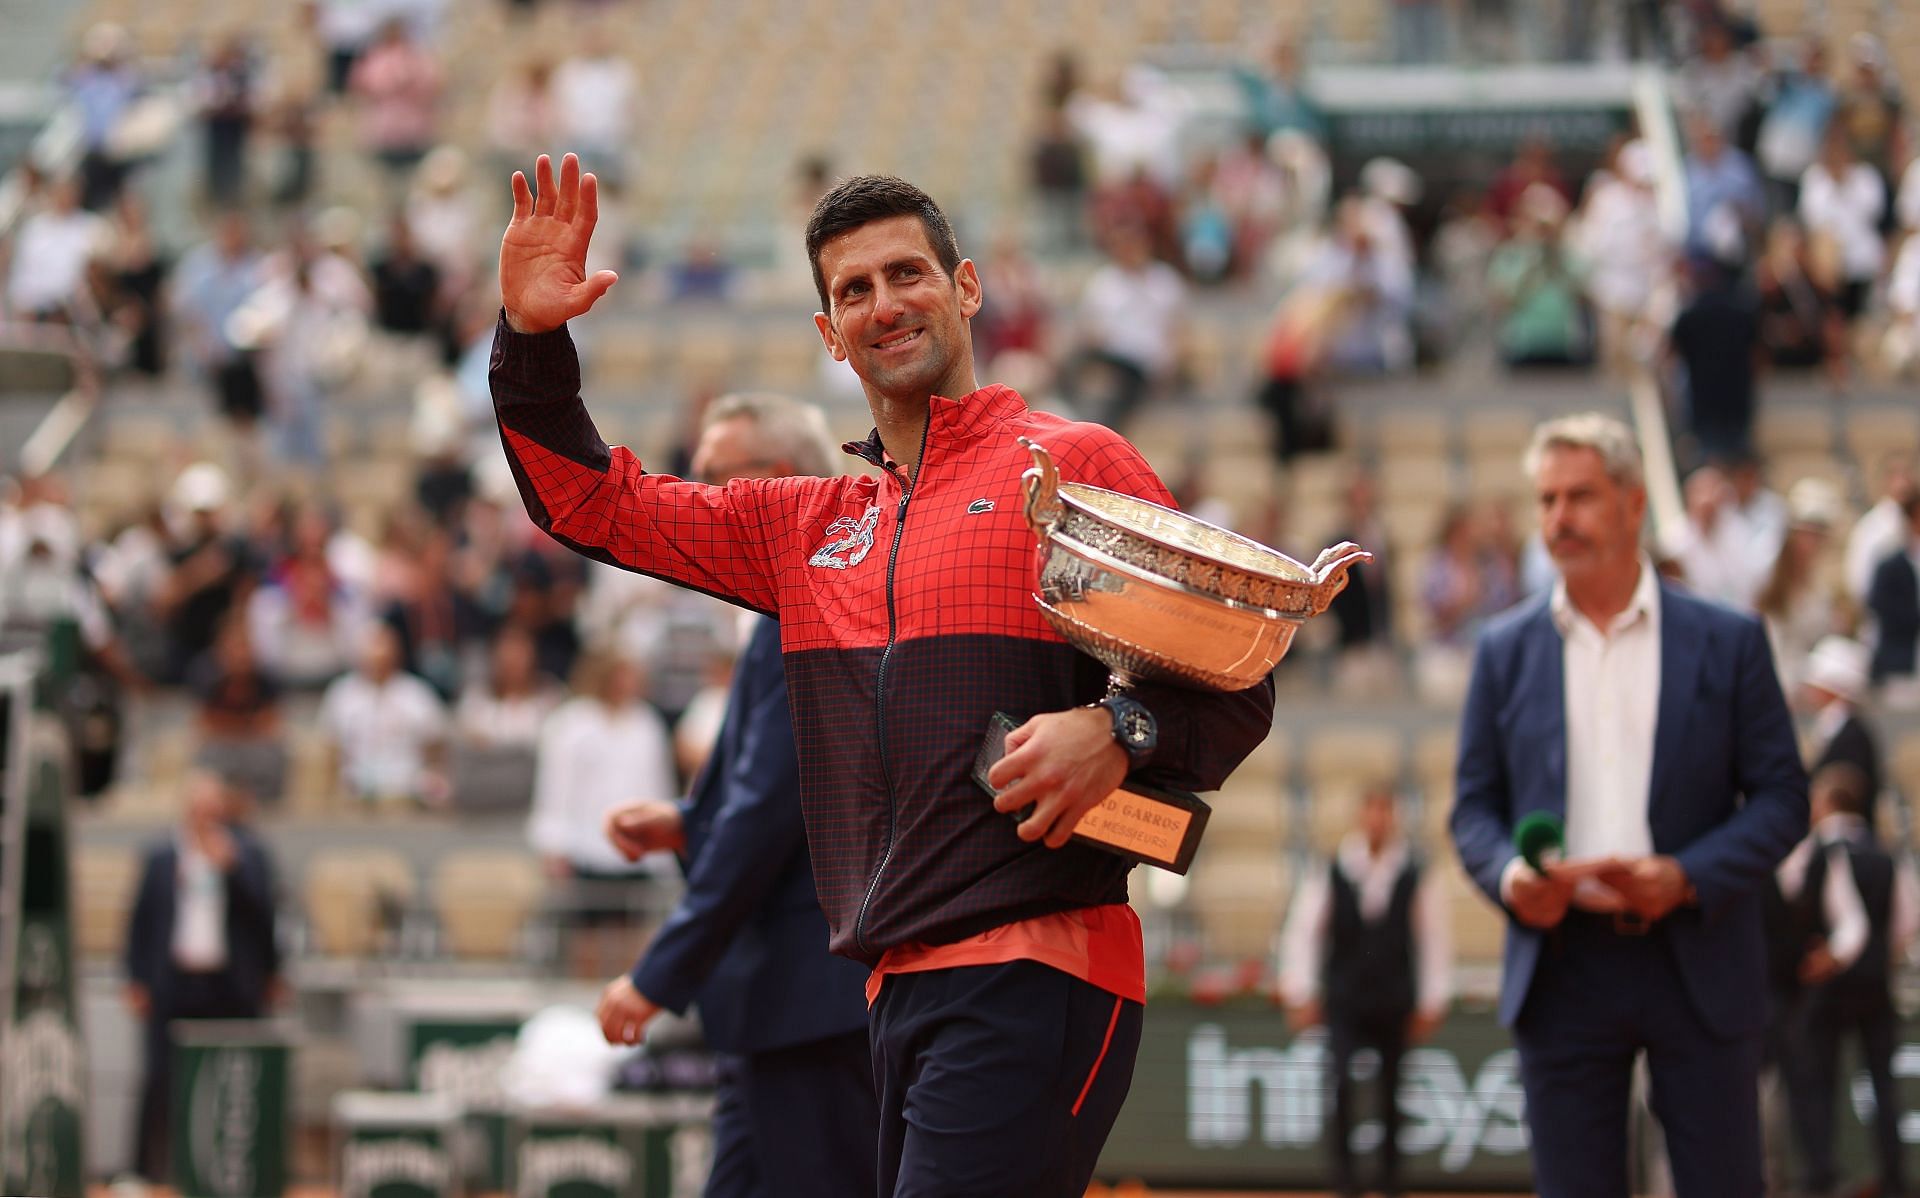 Novak Djokovic triumphed for the third time in Paris.